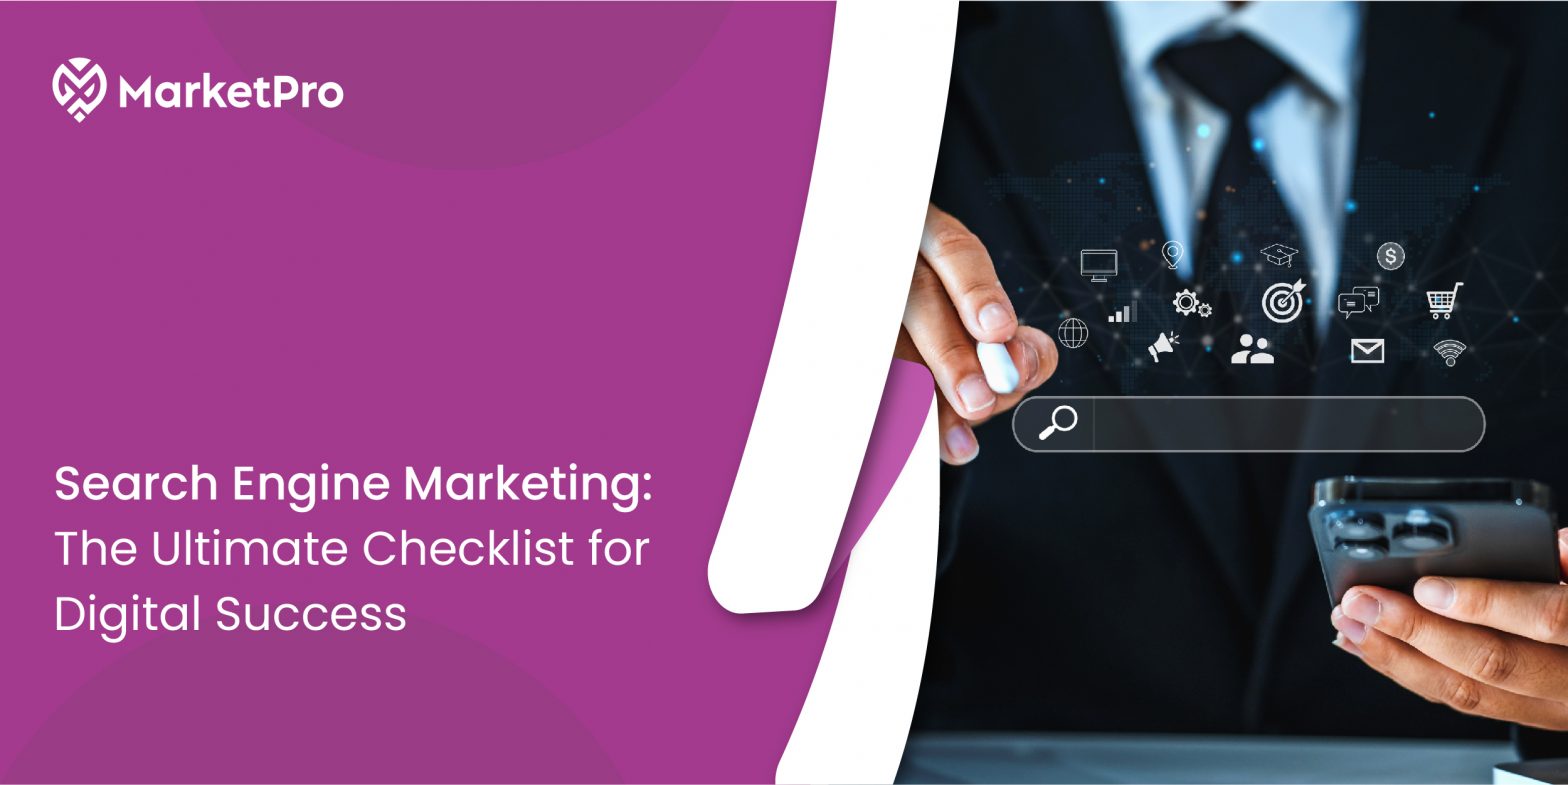 Search Engine Marketing: The Ultimate Checklist for Digital Success